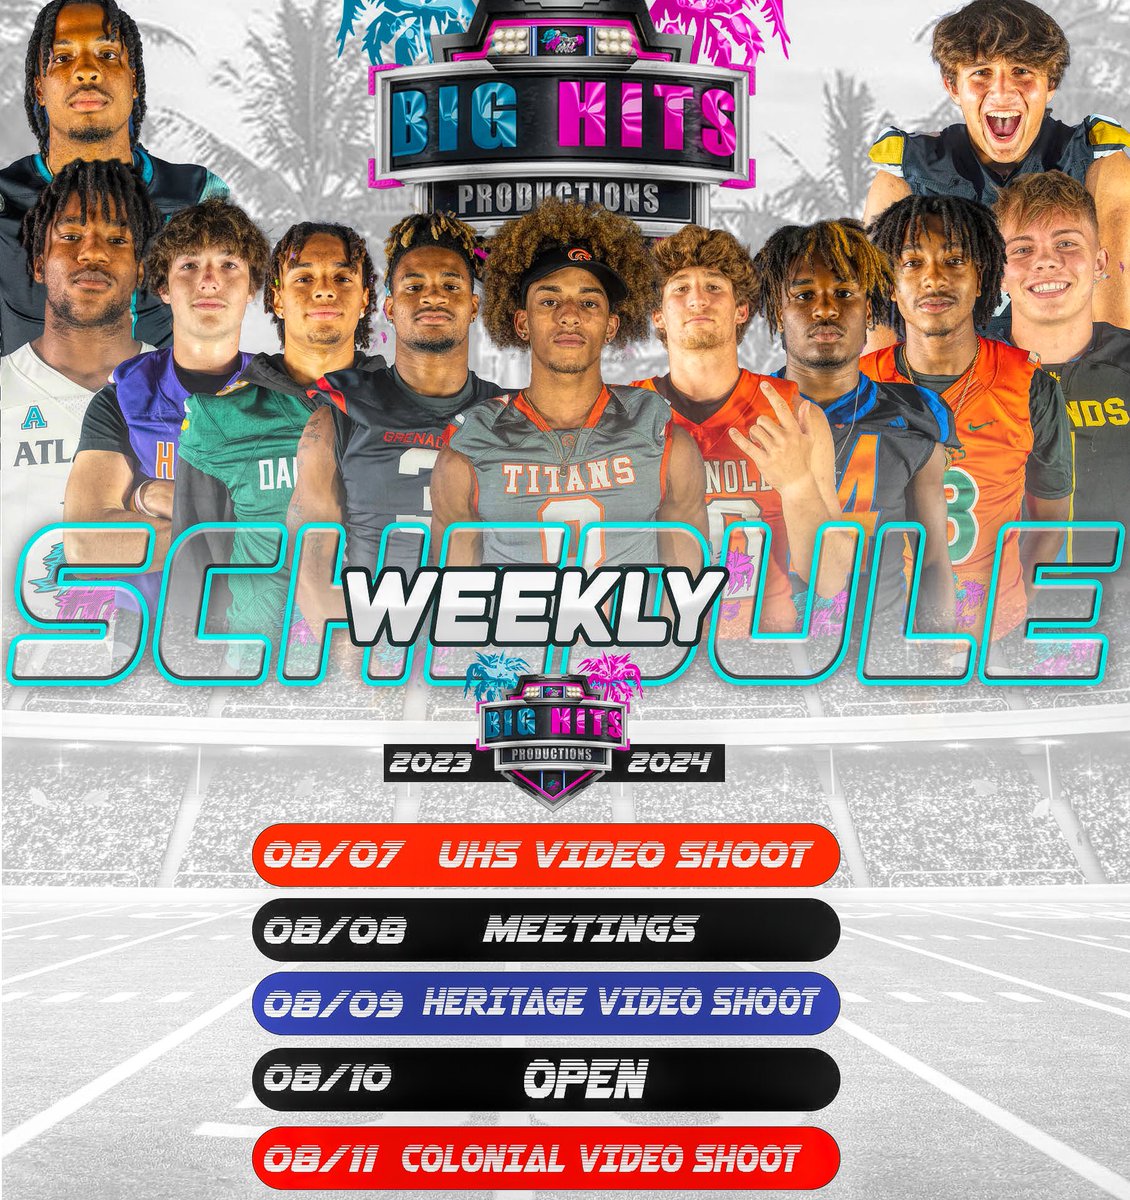 Week schedule is out 
.
@UHSTitansFB  @swarmgangg  @GrenadierFB 
.
@CenFLAPreps  @FlaHSFootball  @HSFB_HUDDLE  @Woody_Cox  @DanLaForestFB @Coach_Benson9